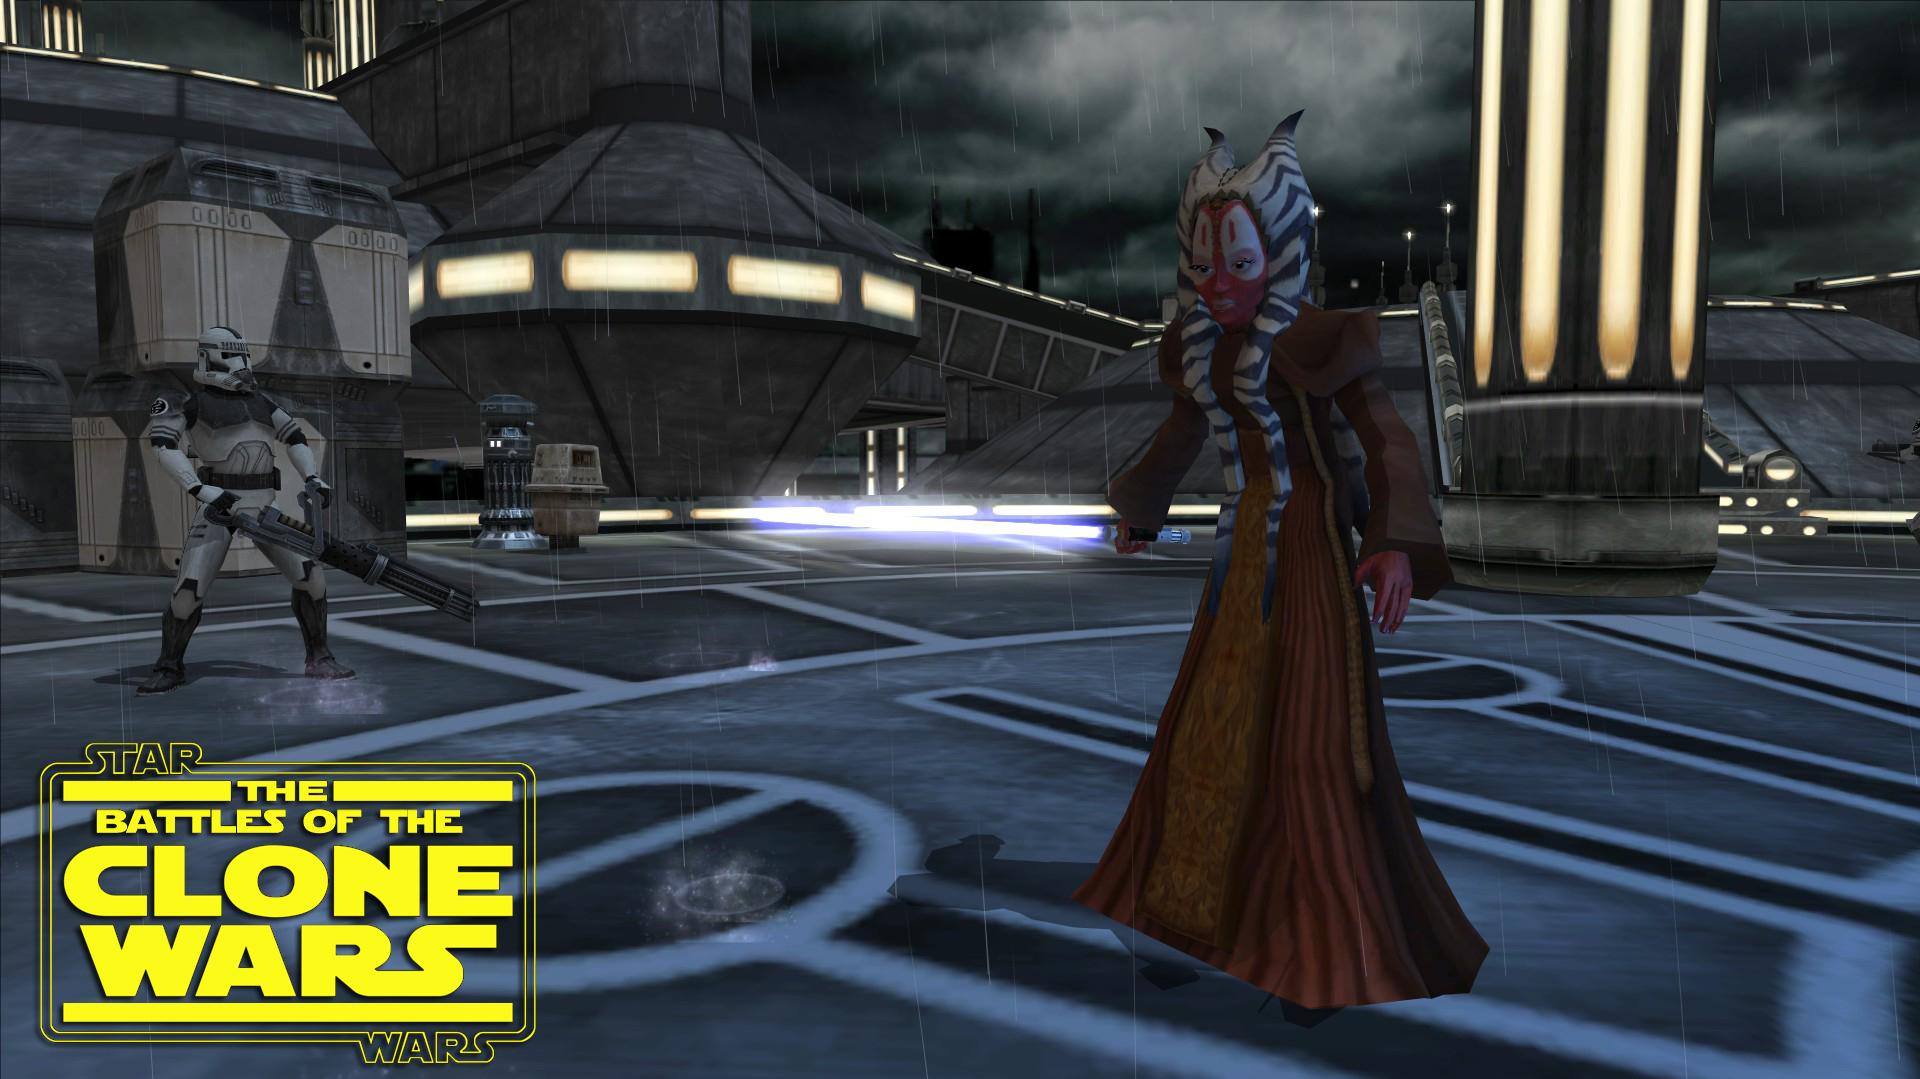 Tcw Shaak Ti And Improved Bx Mando Droids Image The Battles